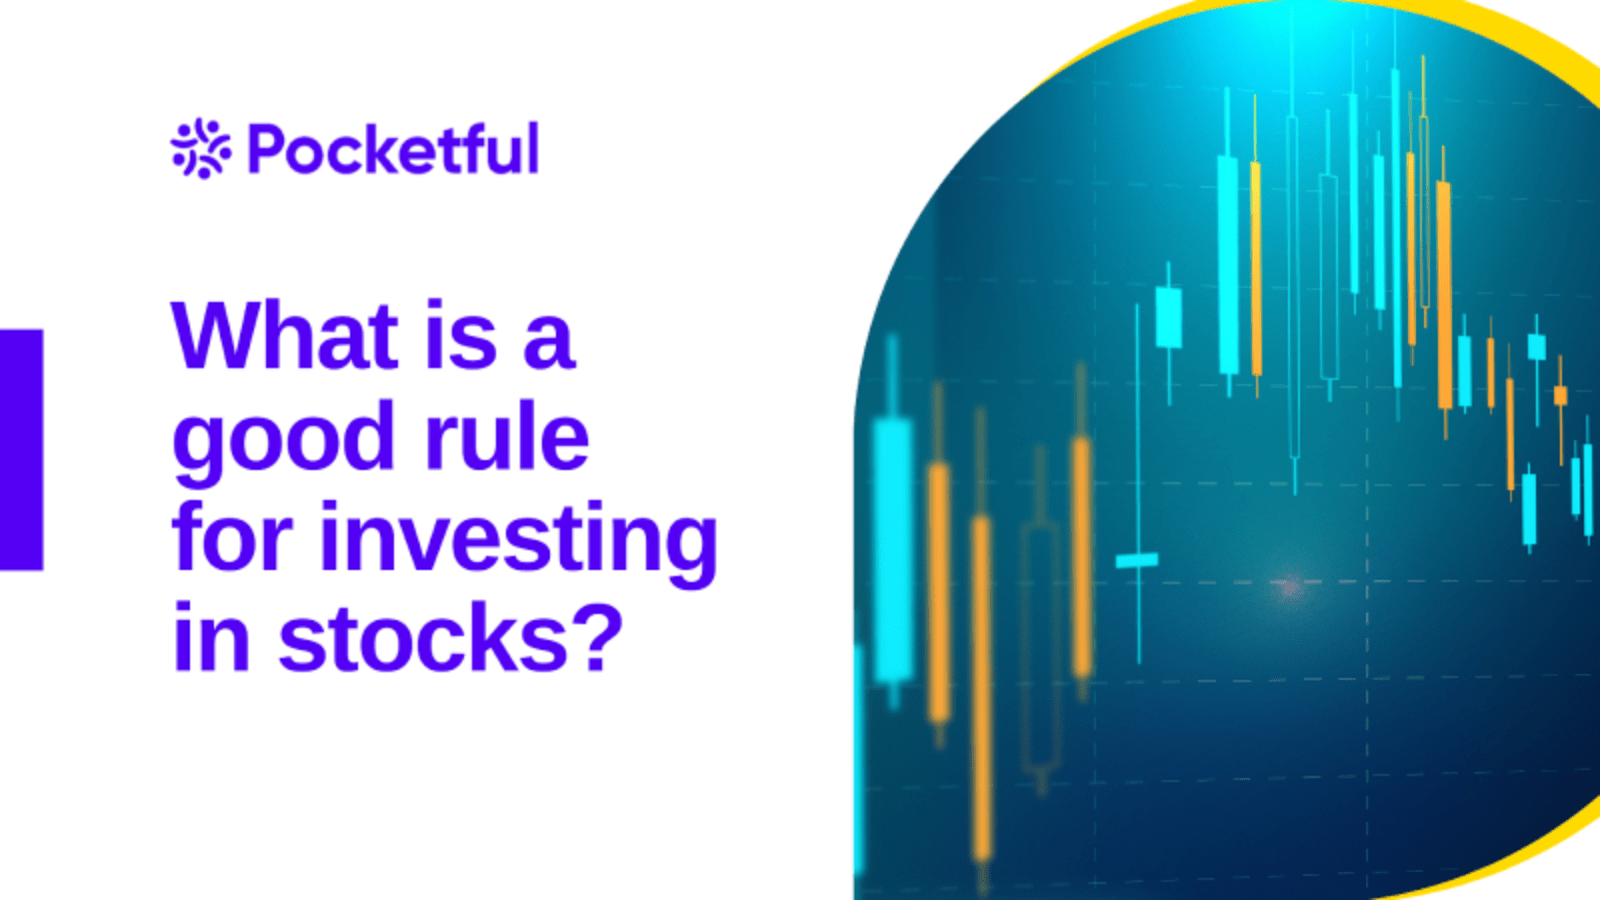 What is a good rule for investing in stocks?